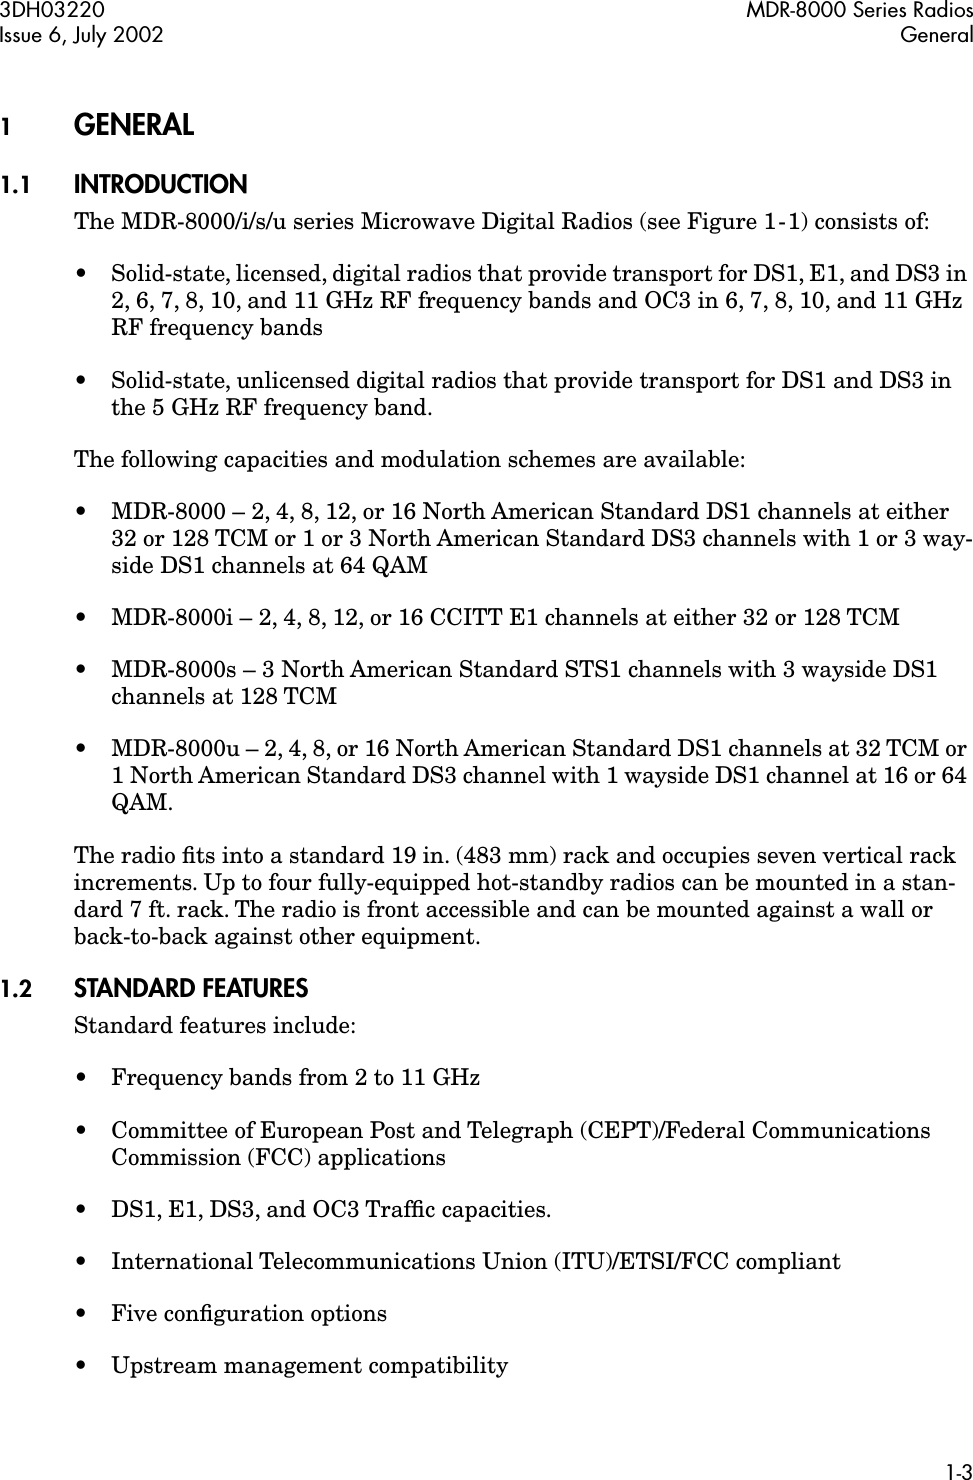  3DH03220 MDR-8000 Series RadiosIssue 6, July 2002 General1-3 1 GENERAL  1.1 INTRODUCTION The MDR-8000/i/s/u series Microwave Digital Radios (see Figure 1-1) consists of:•Solid-state, licensed, digital radios that provide transport for DS1, E1, and DS3 in 2, 6, 7, 8, 10, and 11 GHz RF frequency bands and OC3 in 6, 7, 8, 10, and 11 GHz RF frequency bands• Solid-state, unlicensed digital radios that provide transport for DS1 and DS3 in the 5 GHz RF frequency band.The following capacities and modulation schemes are available:• MDR-8000 – 2, 4, 8, 12, or 16 North American Standard DS1 channels at either 32 or 128 TCM or 1 or 3 North American Standard DS3 channels with 1 or 3 way-side DS1 channels at 64 QAM• MDR-8000i – 2, 4, 8, 12, or 16 CCITT E1 channels at either 32 or 128 TCM• MDR-8000s – 3 North American Standard STS1 channels with 3 wayside DS1 channels at 128 TCM•MDR-8000u – 2, 4, 8, or 16 North American Standard DS1 channels at 32 TCM or 1 North American Standard DS3 channel with 1 wayside DS1 channel at 16 or 64 QAM.The radio ﬁts into a standard 19 in. (483 mm) rack and occupies seven vertical rack increments. Up to four fully-equipped hot-standby radios can be mounted in a stan-dard 7 ft. rack. The radio is front accessible and can be mounted against a wall or back-to-back against other equipment. 1.2 STANDARD FEATURES Standard features include:•Frequency bands from 2 to 11 GHz• Committee of European Post and Telegraph (CEPT)/Federal Communications Commission (FCC) applications• DS1, E1, DS3, and OC3 Trafﬁc capacities.• International Telecommunications Union (ITU)/ETSI/FCC compliant•Five conﬁguration options• Upstream management compatibility